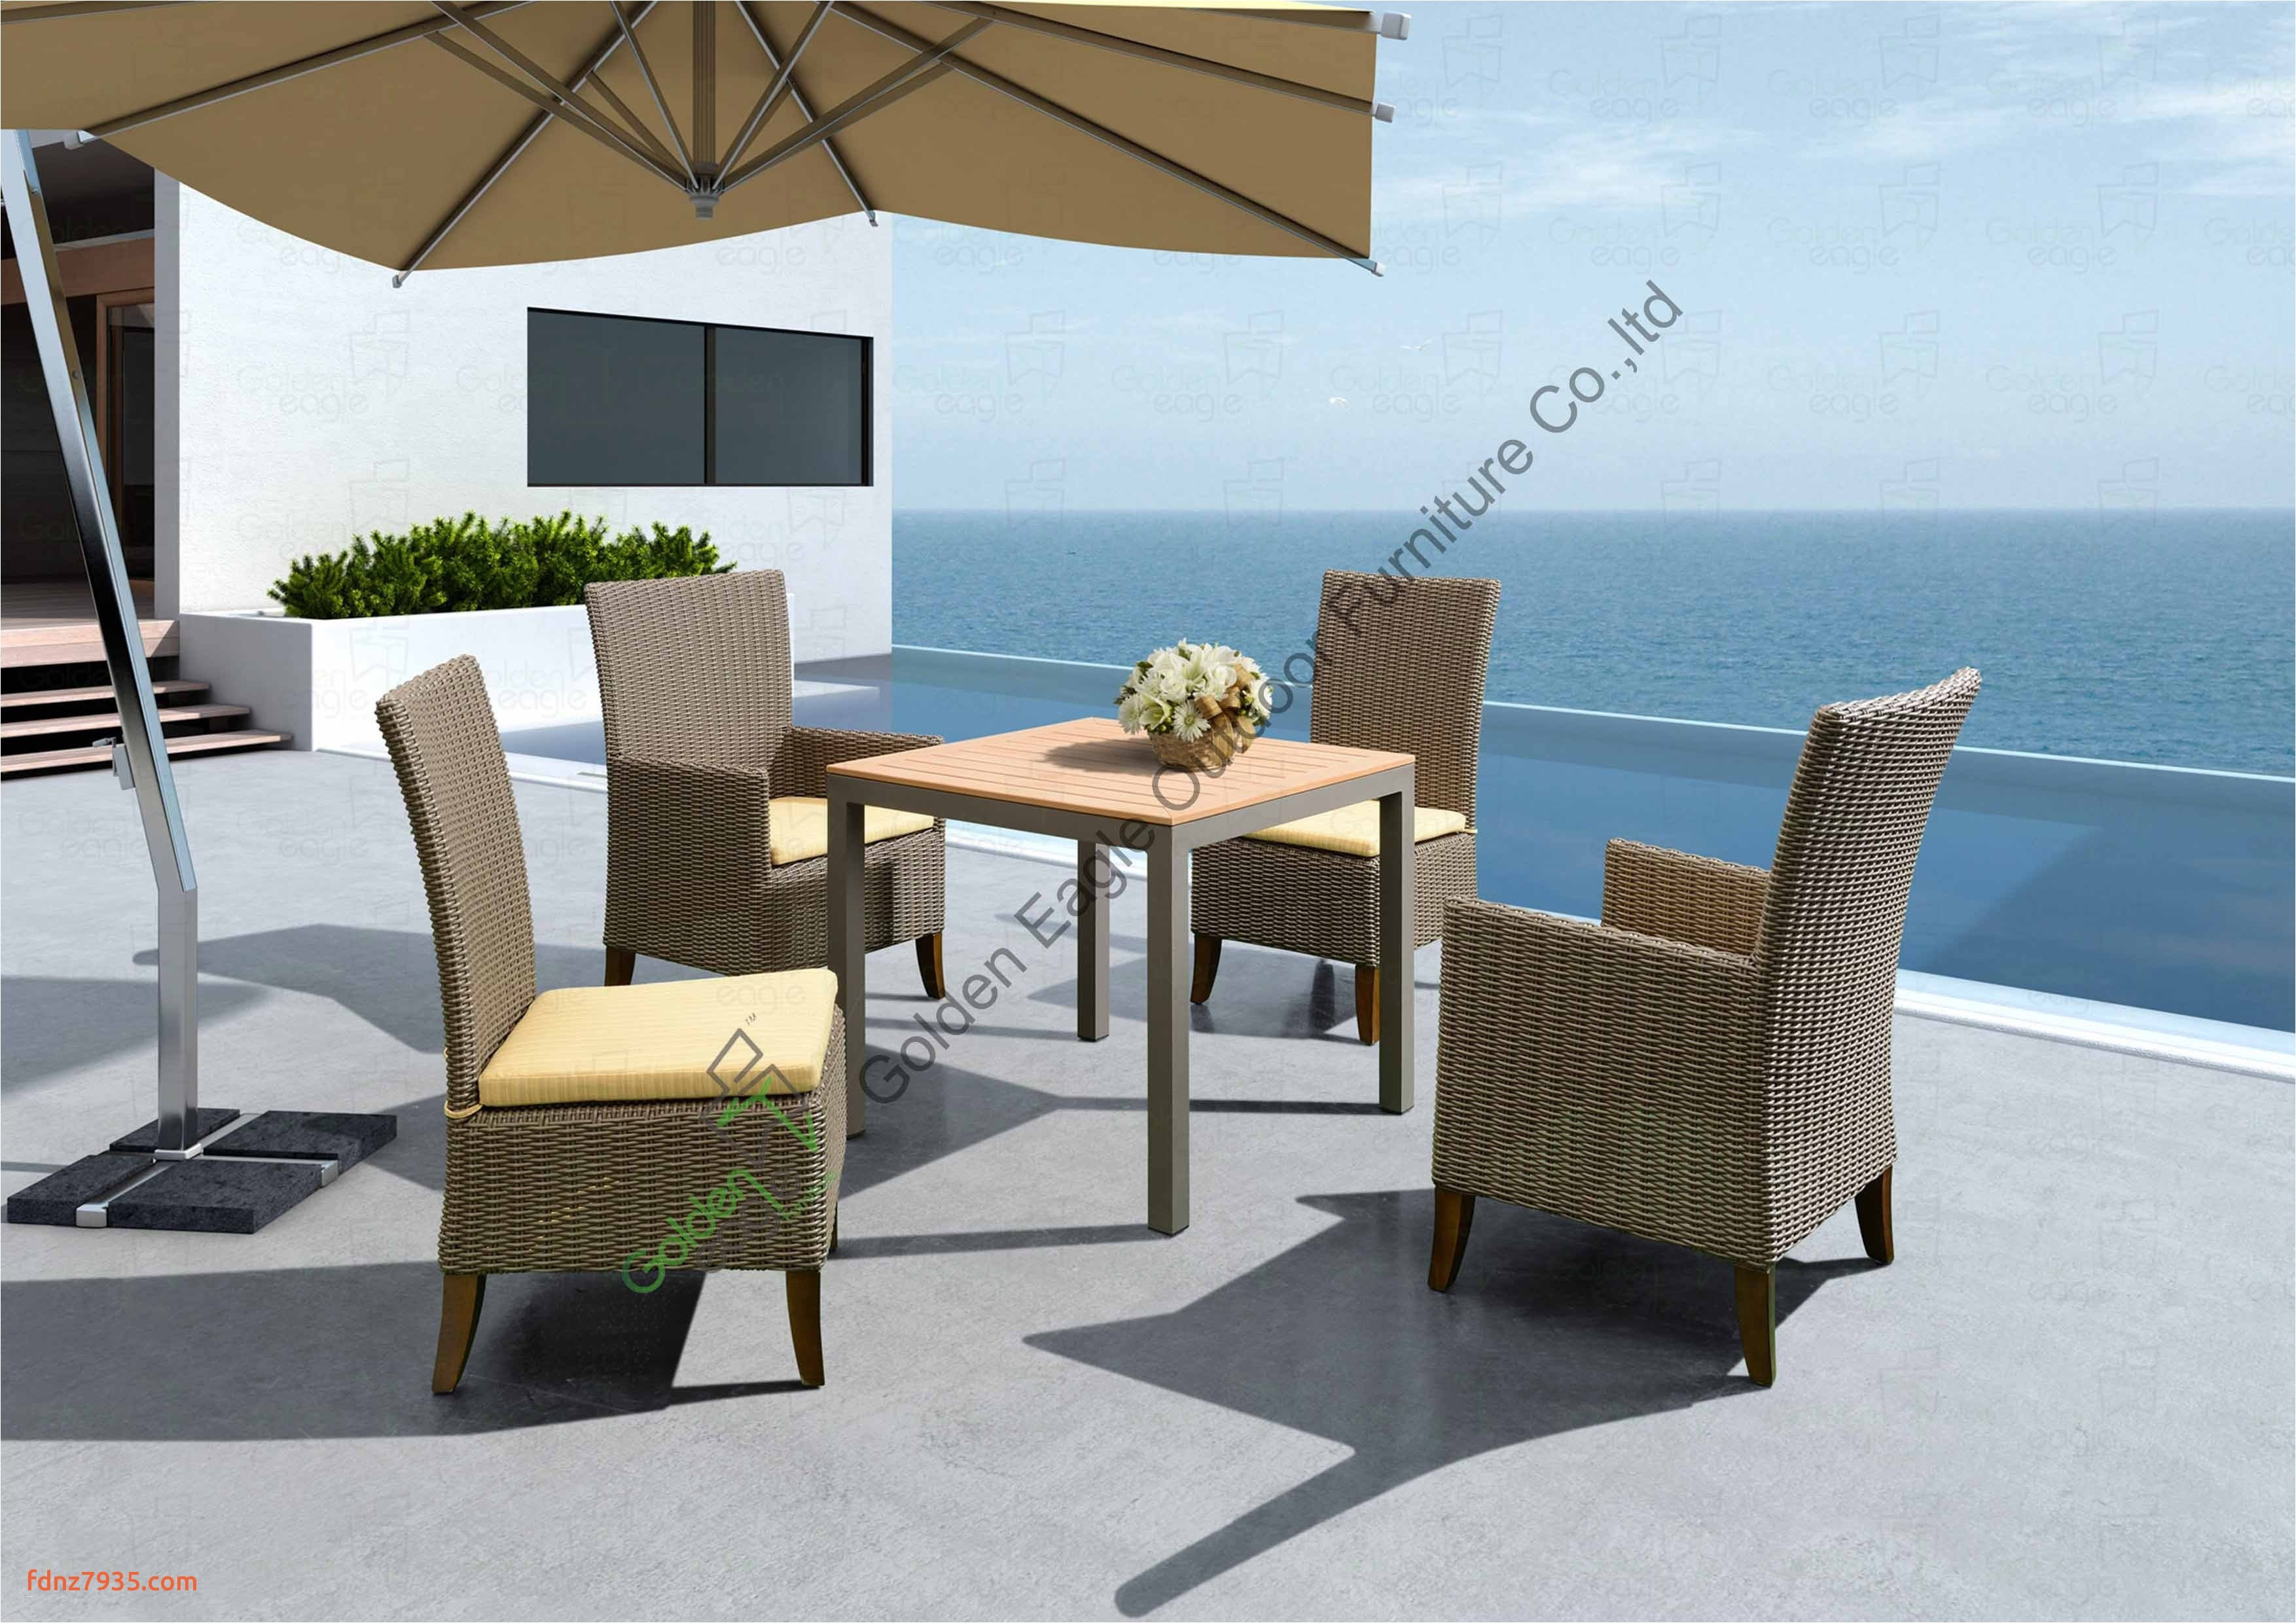 15 Fashionable Umbrella Vase Stand 2024 free download umbrella vase stand of outdoor patio set with umbrella fresh sofa design regarding outdoor patio umbrellas awesome high top patio furniture best wicker outdoor sofa 0d patio chairs